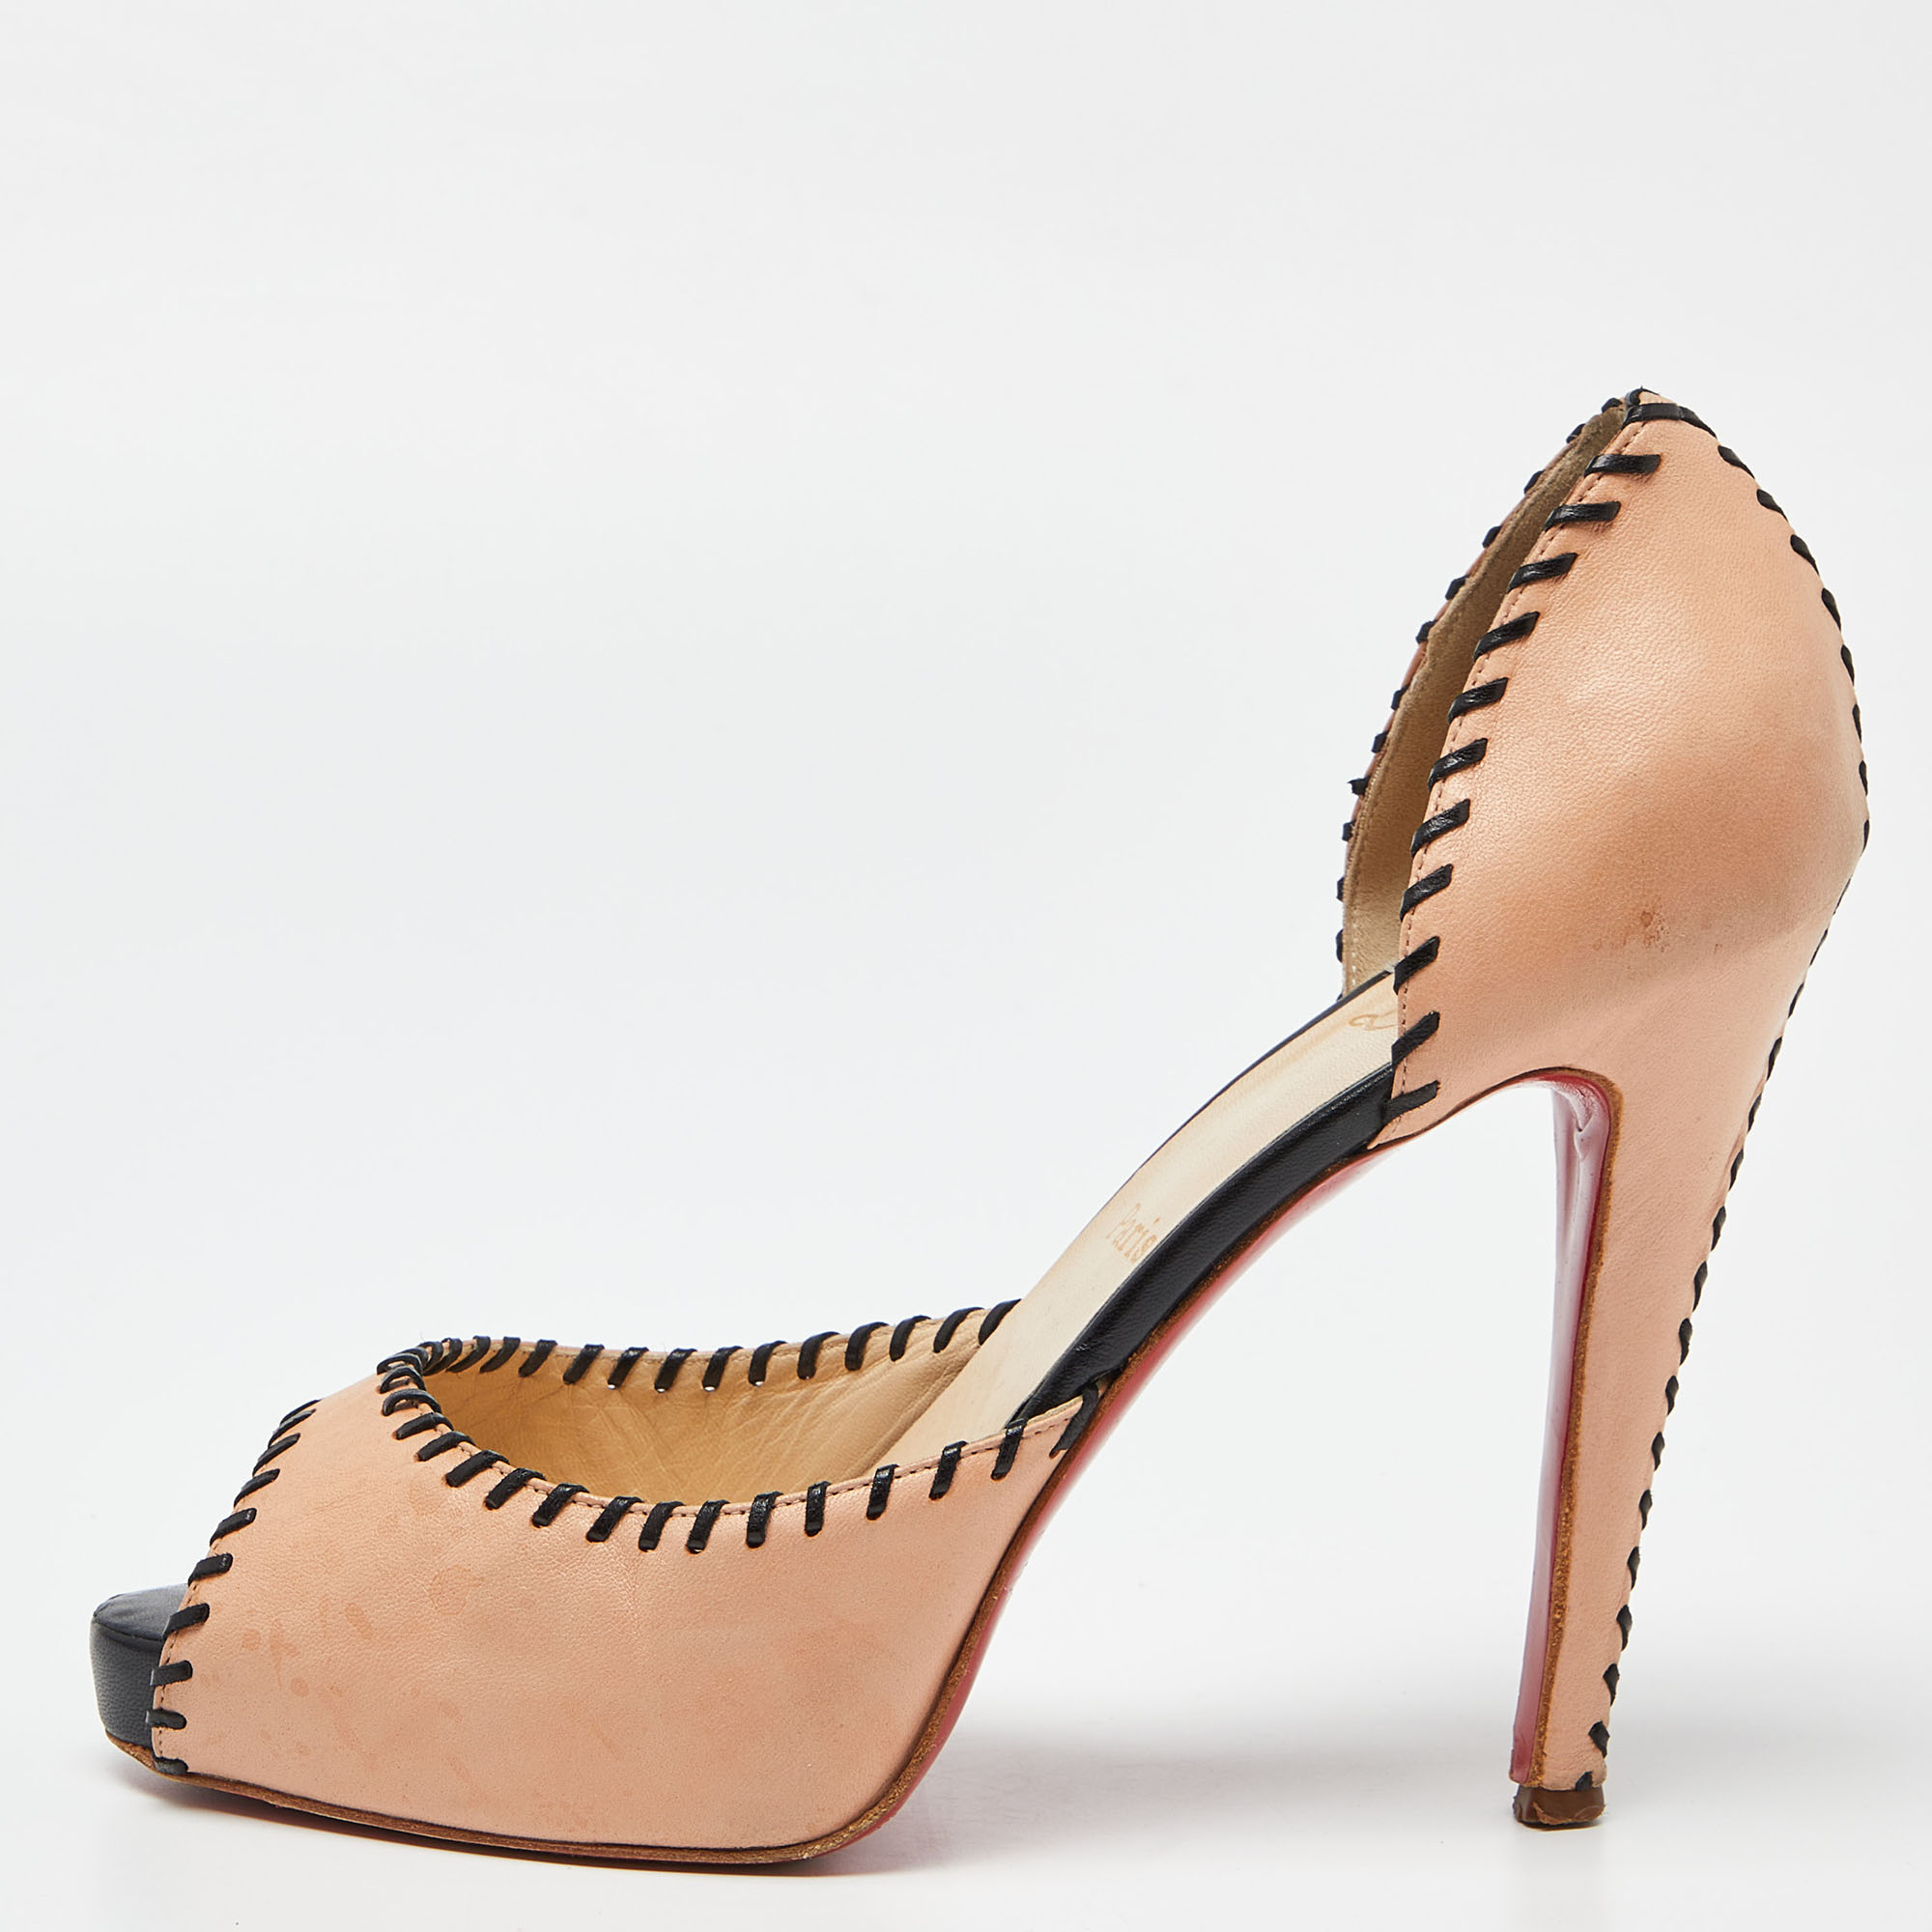 Christian louboutin blush pink leather whipstitch detail peep toe d'orsay pumps size 40.5